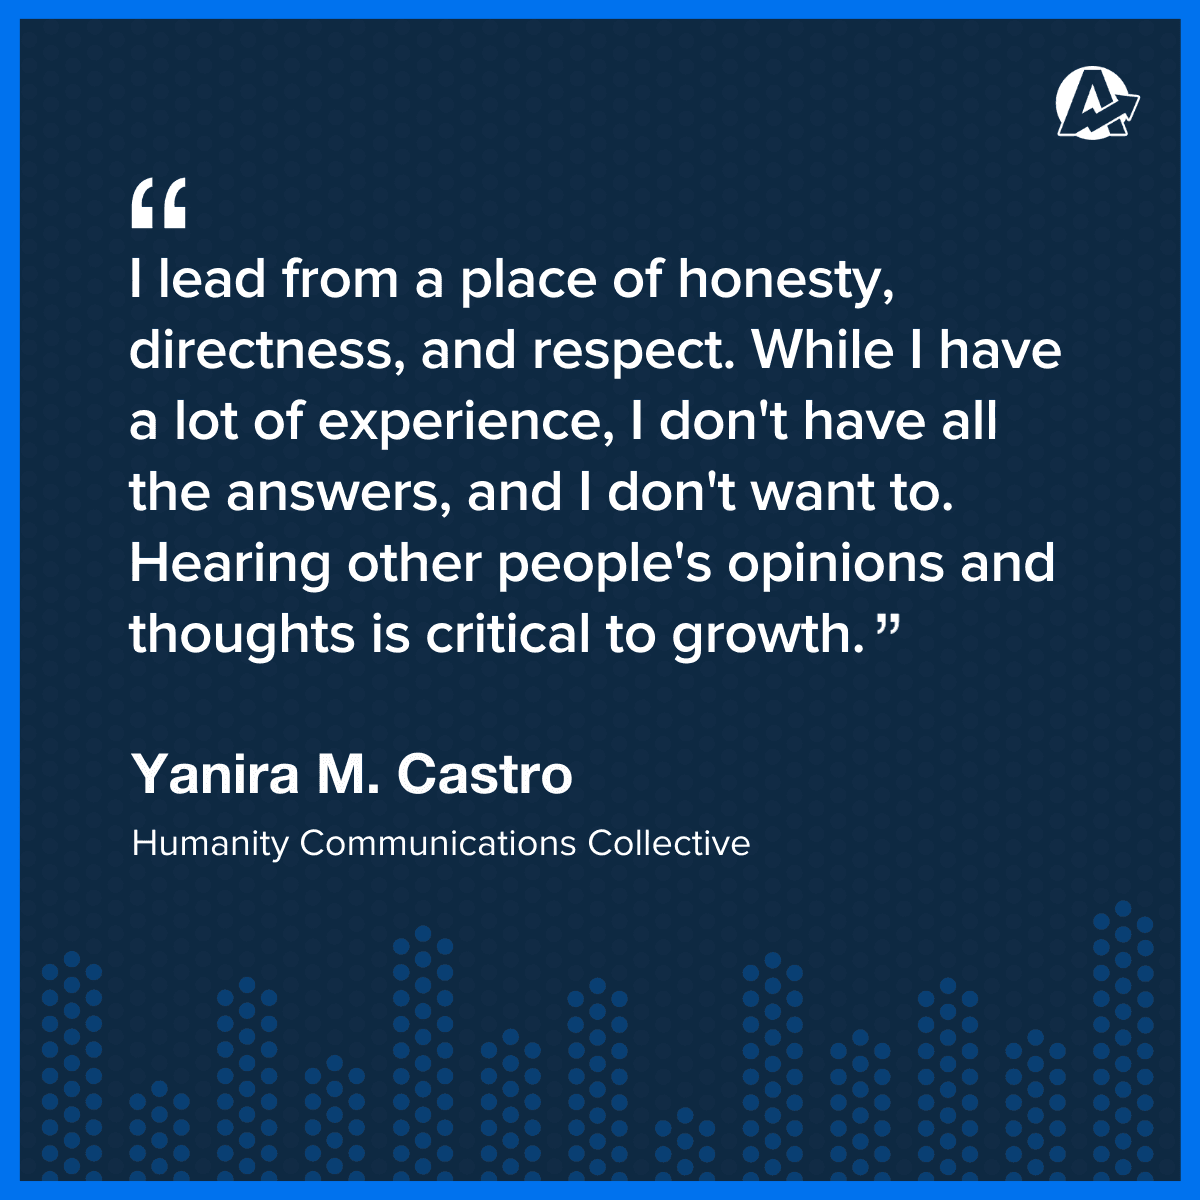 Quote from Yanira M Castro on Conscious Agency Leadership